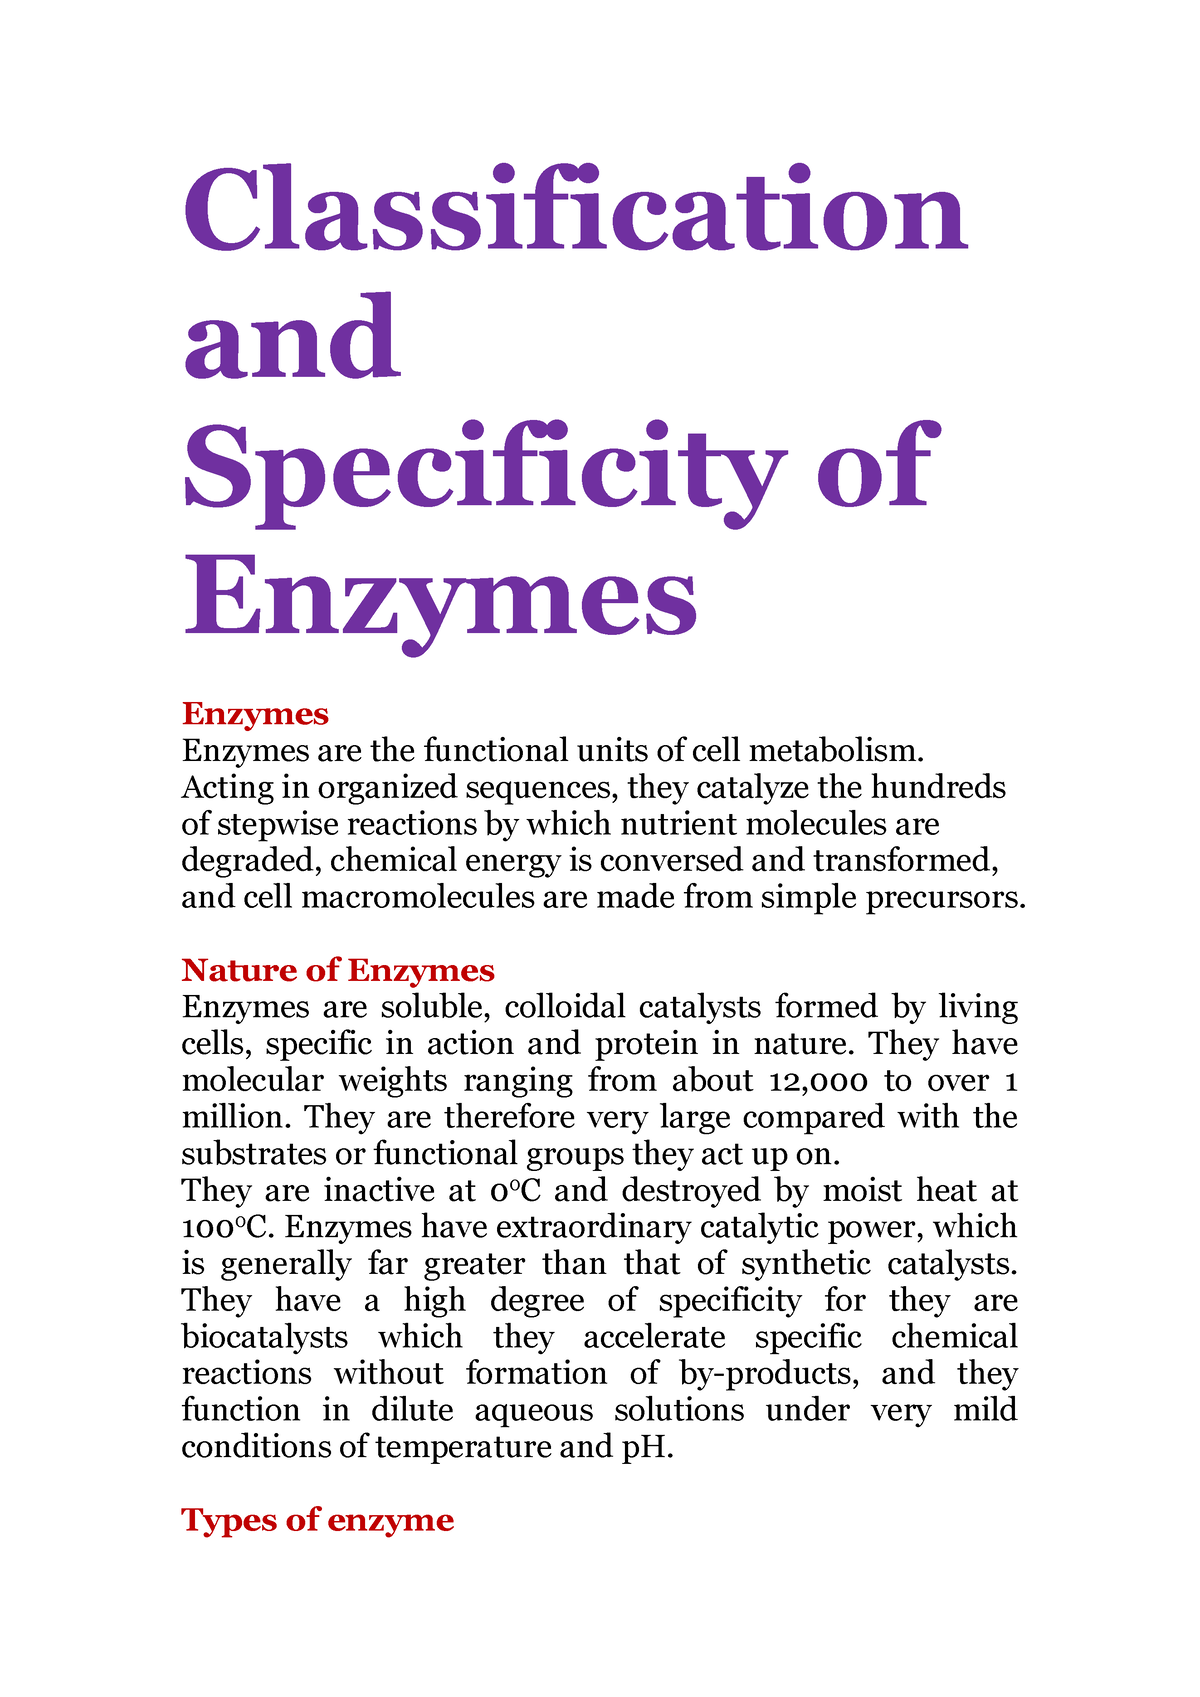 research paper on enzymes pdf